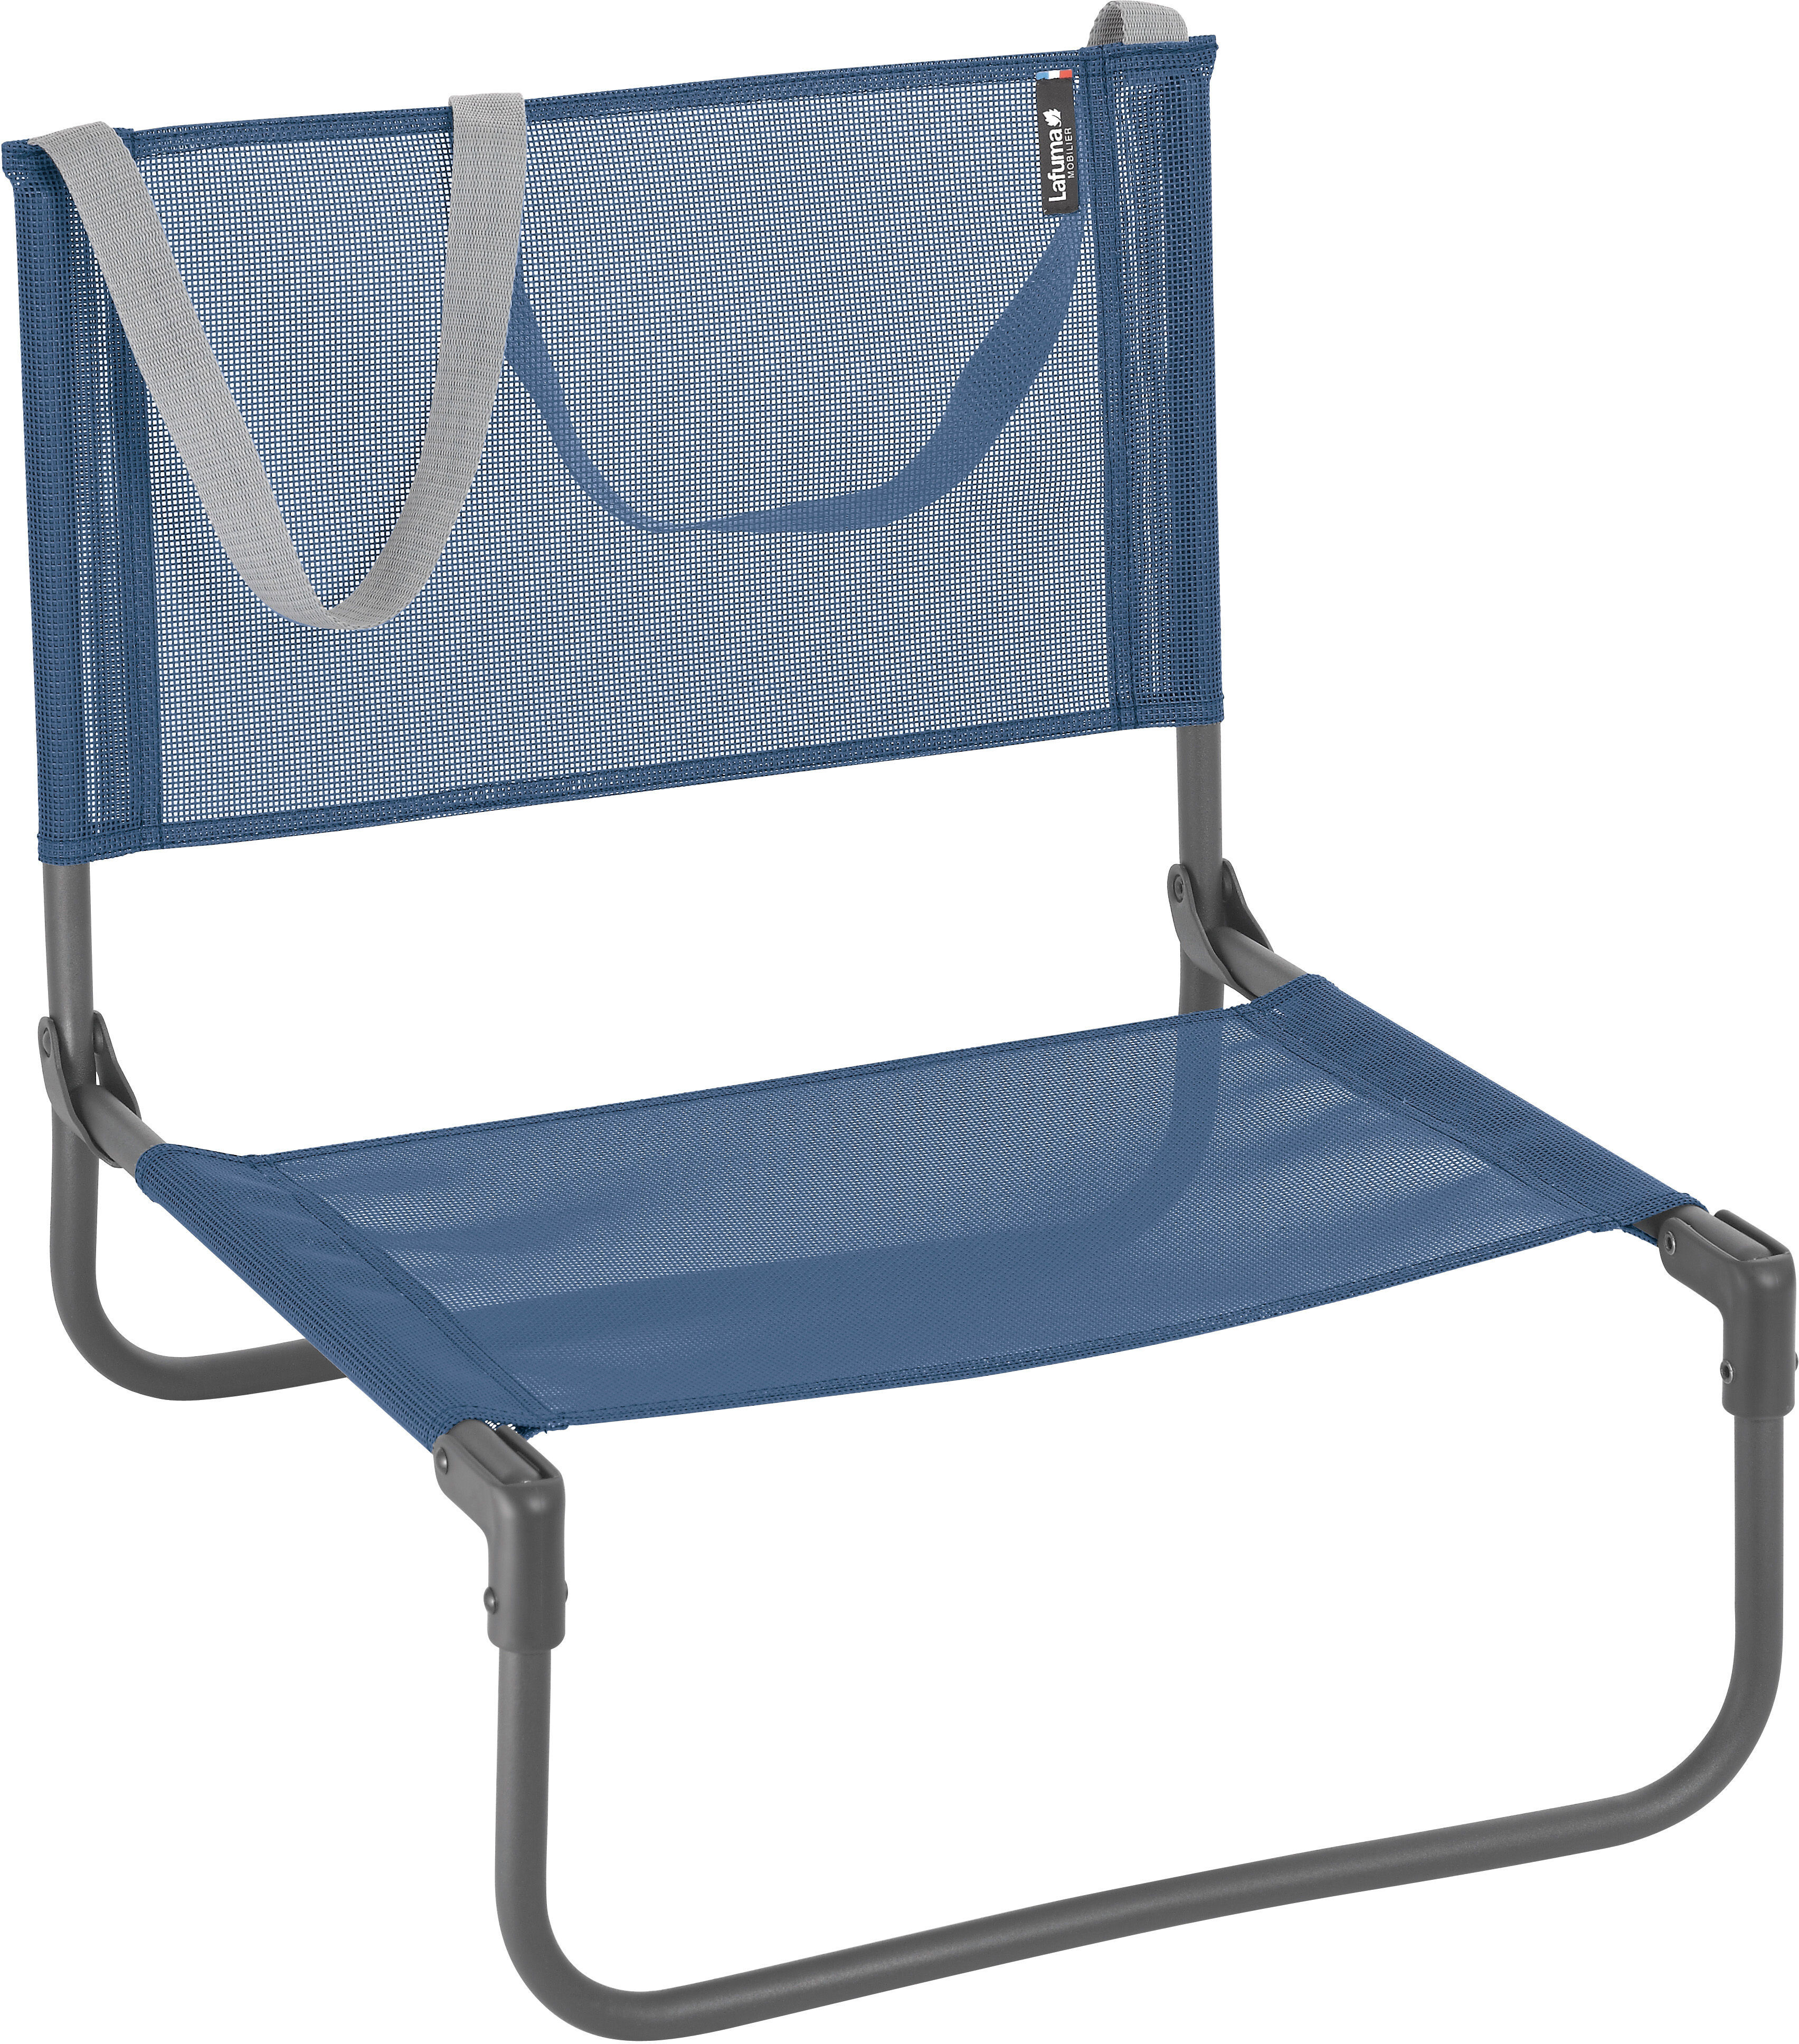 Minimalist Notre Dame Beach Chair for Large Space